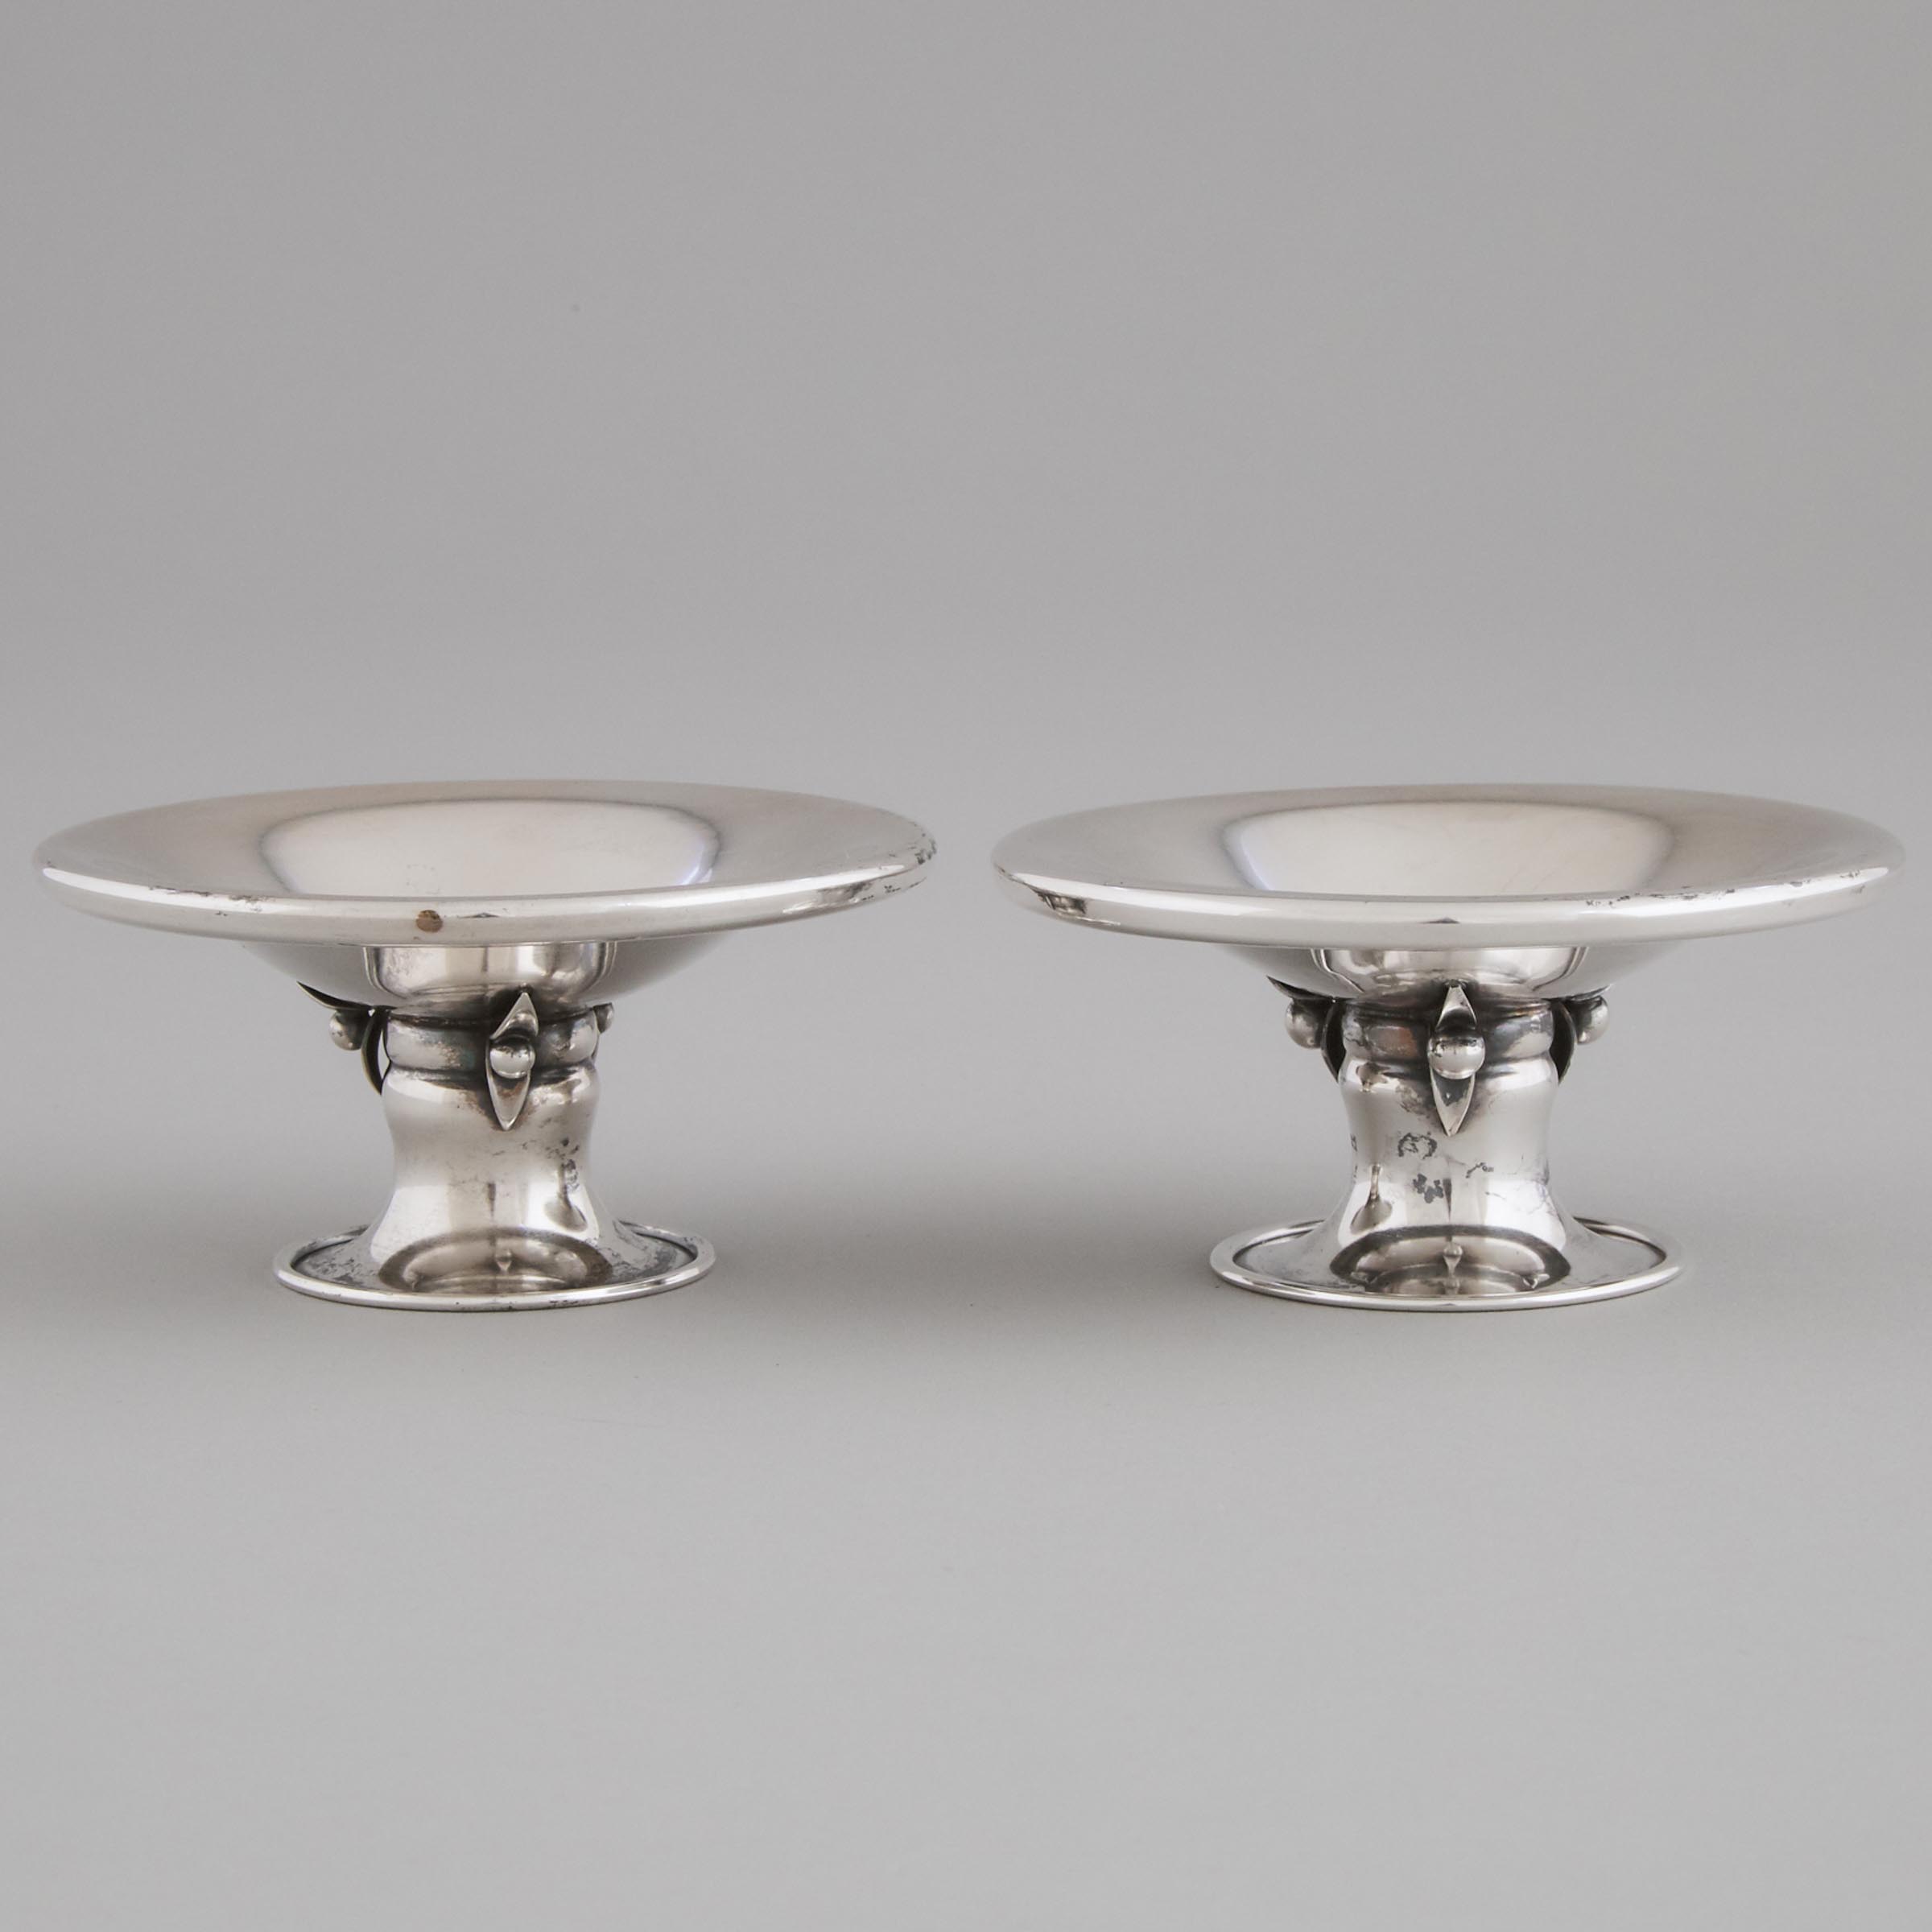 Pair of Canadian Silver Candlesticks/Candy Dishes, Poul Petersen, Montreal, Que., mid-20th century